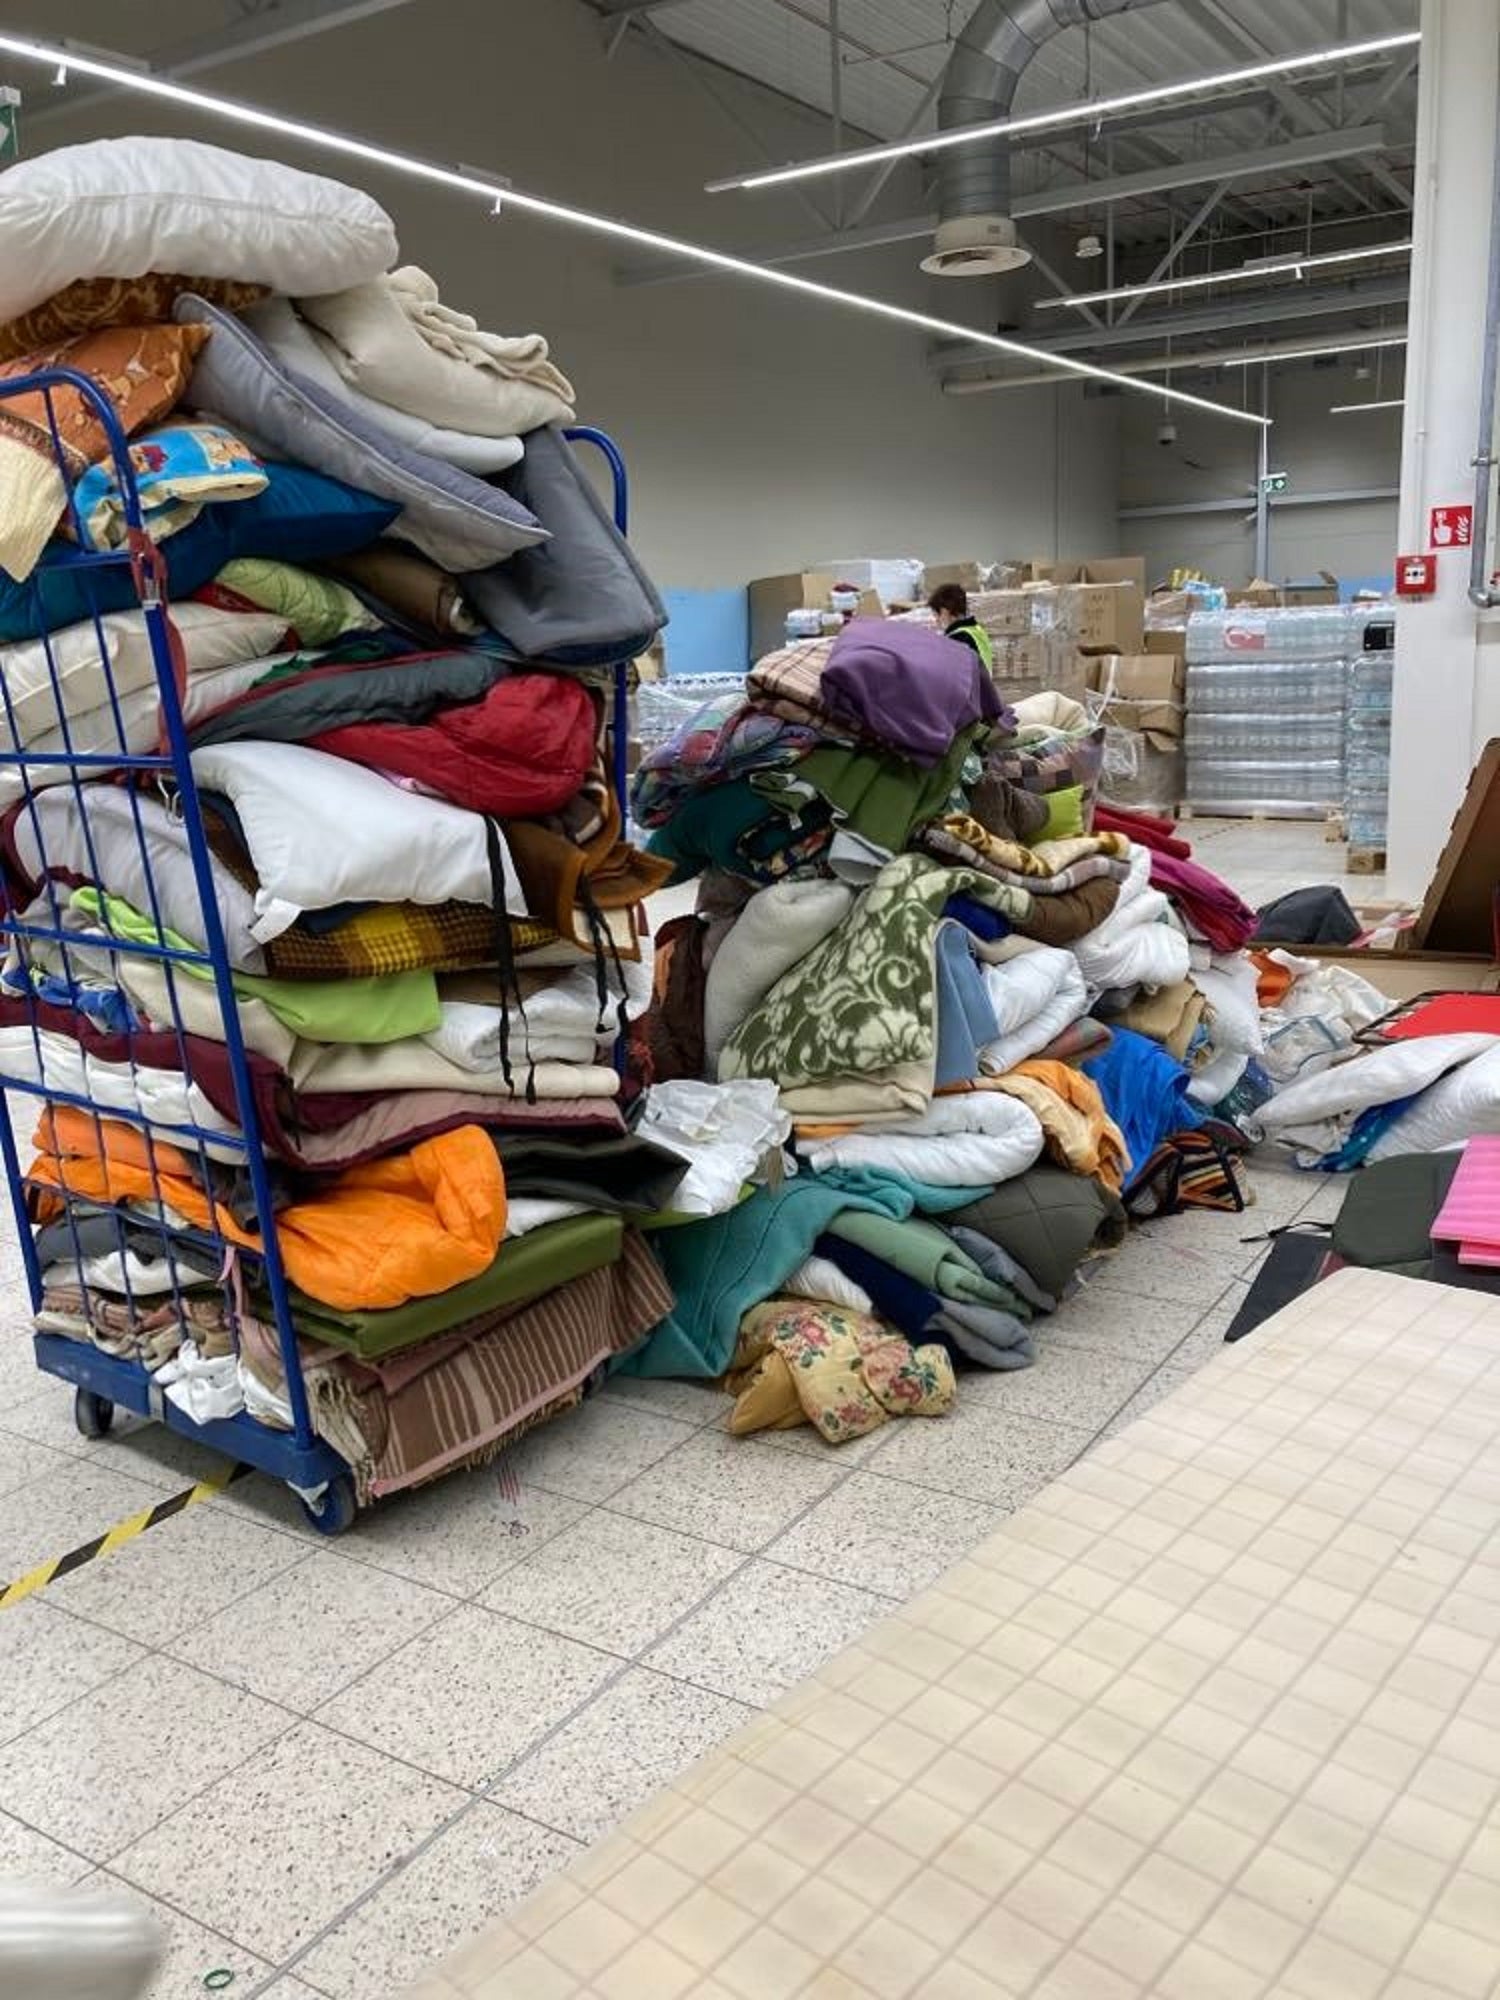 A pile of donations at the refugee centre (Laura Rice)